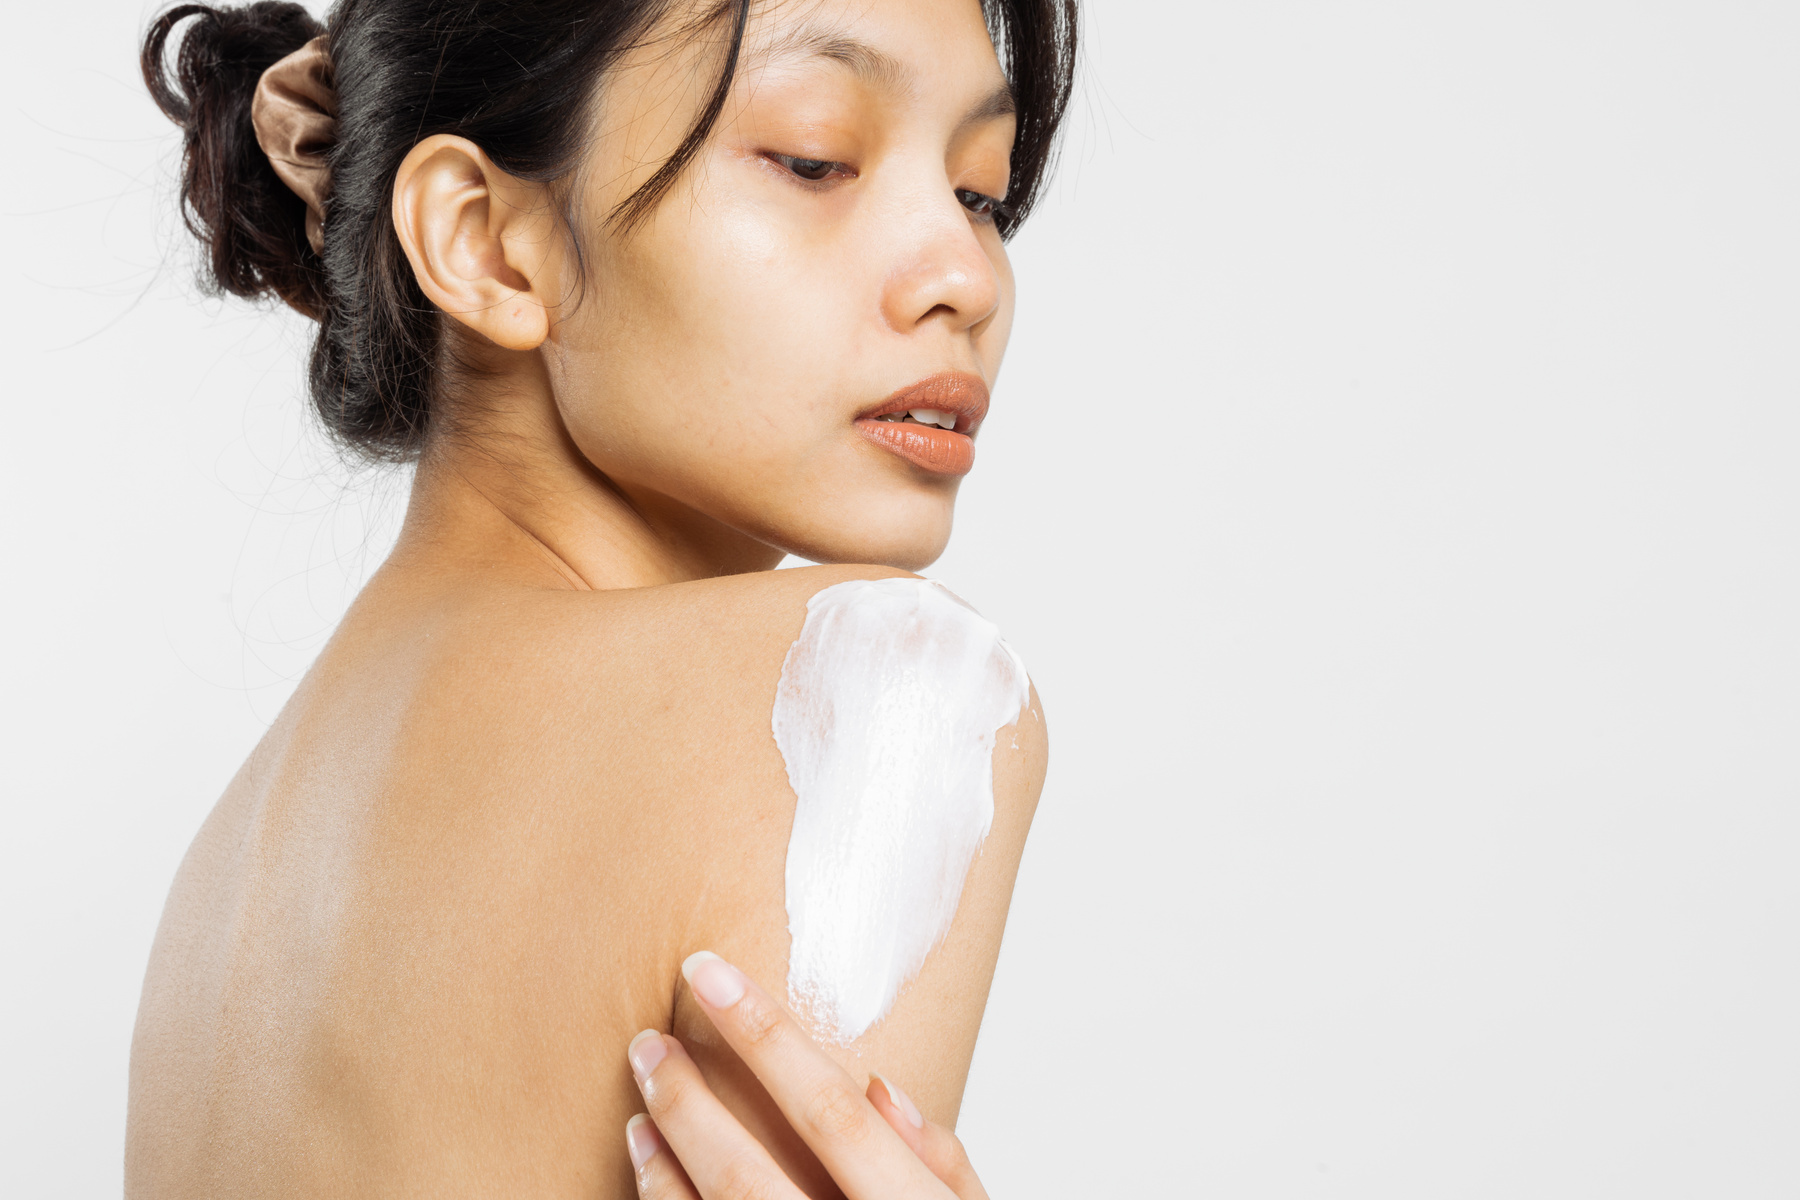 Portrait of a Woman with Lotion on Shoulder